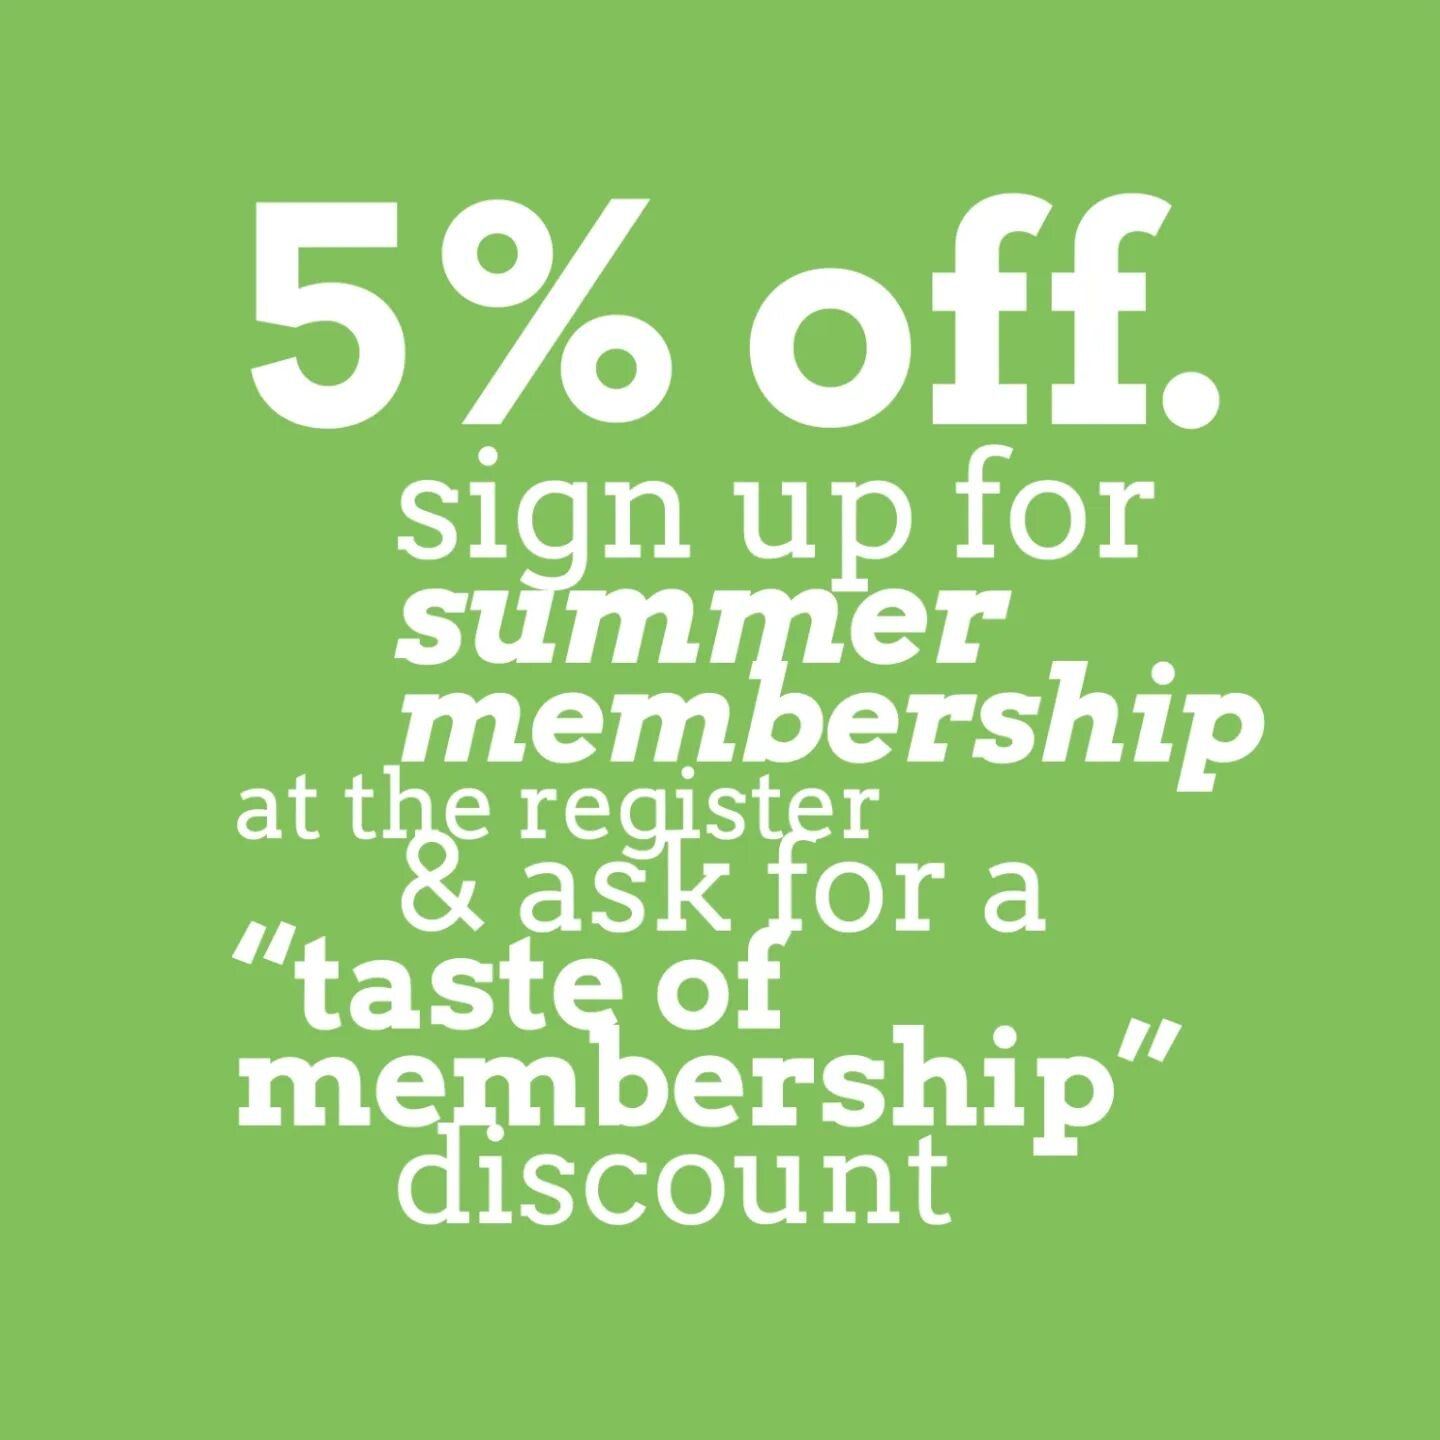 it's that time of year! put ur email down at the register to get an email about summer membership &amp; ask for a &quot;taste of membership&quot; discount &mdash; we'll get you, well, just that! if you're ready to commit, you can head to foodcollecti